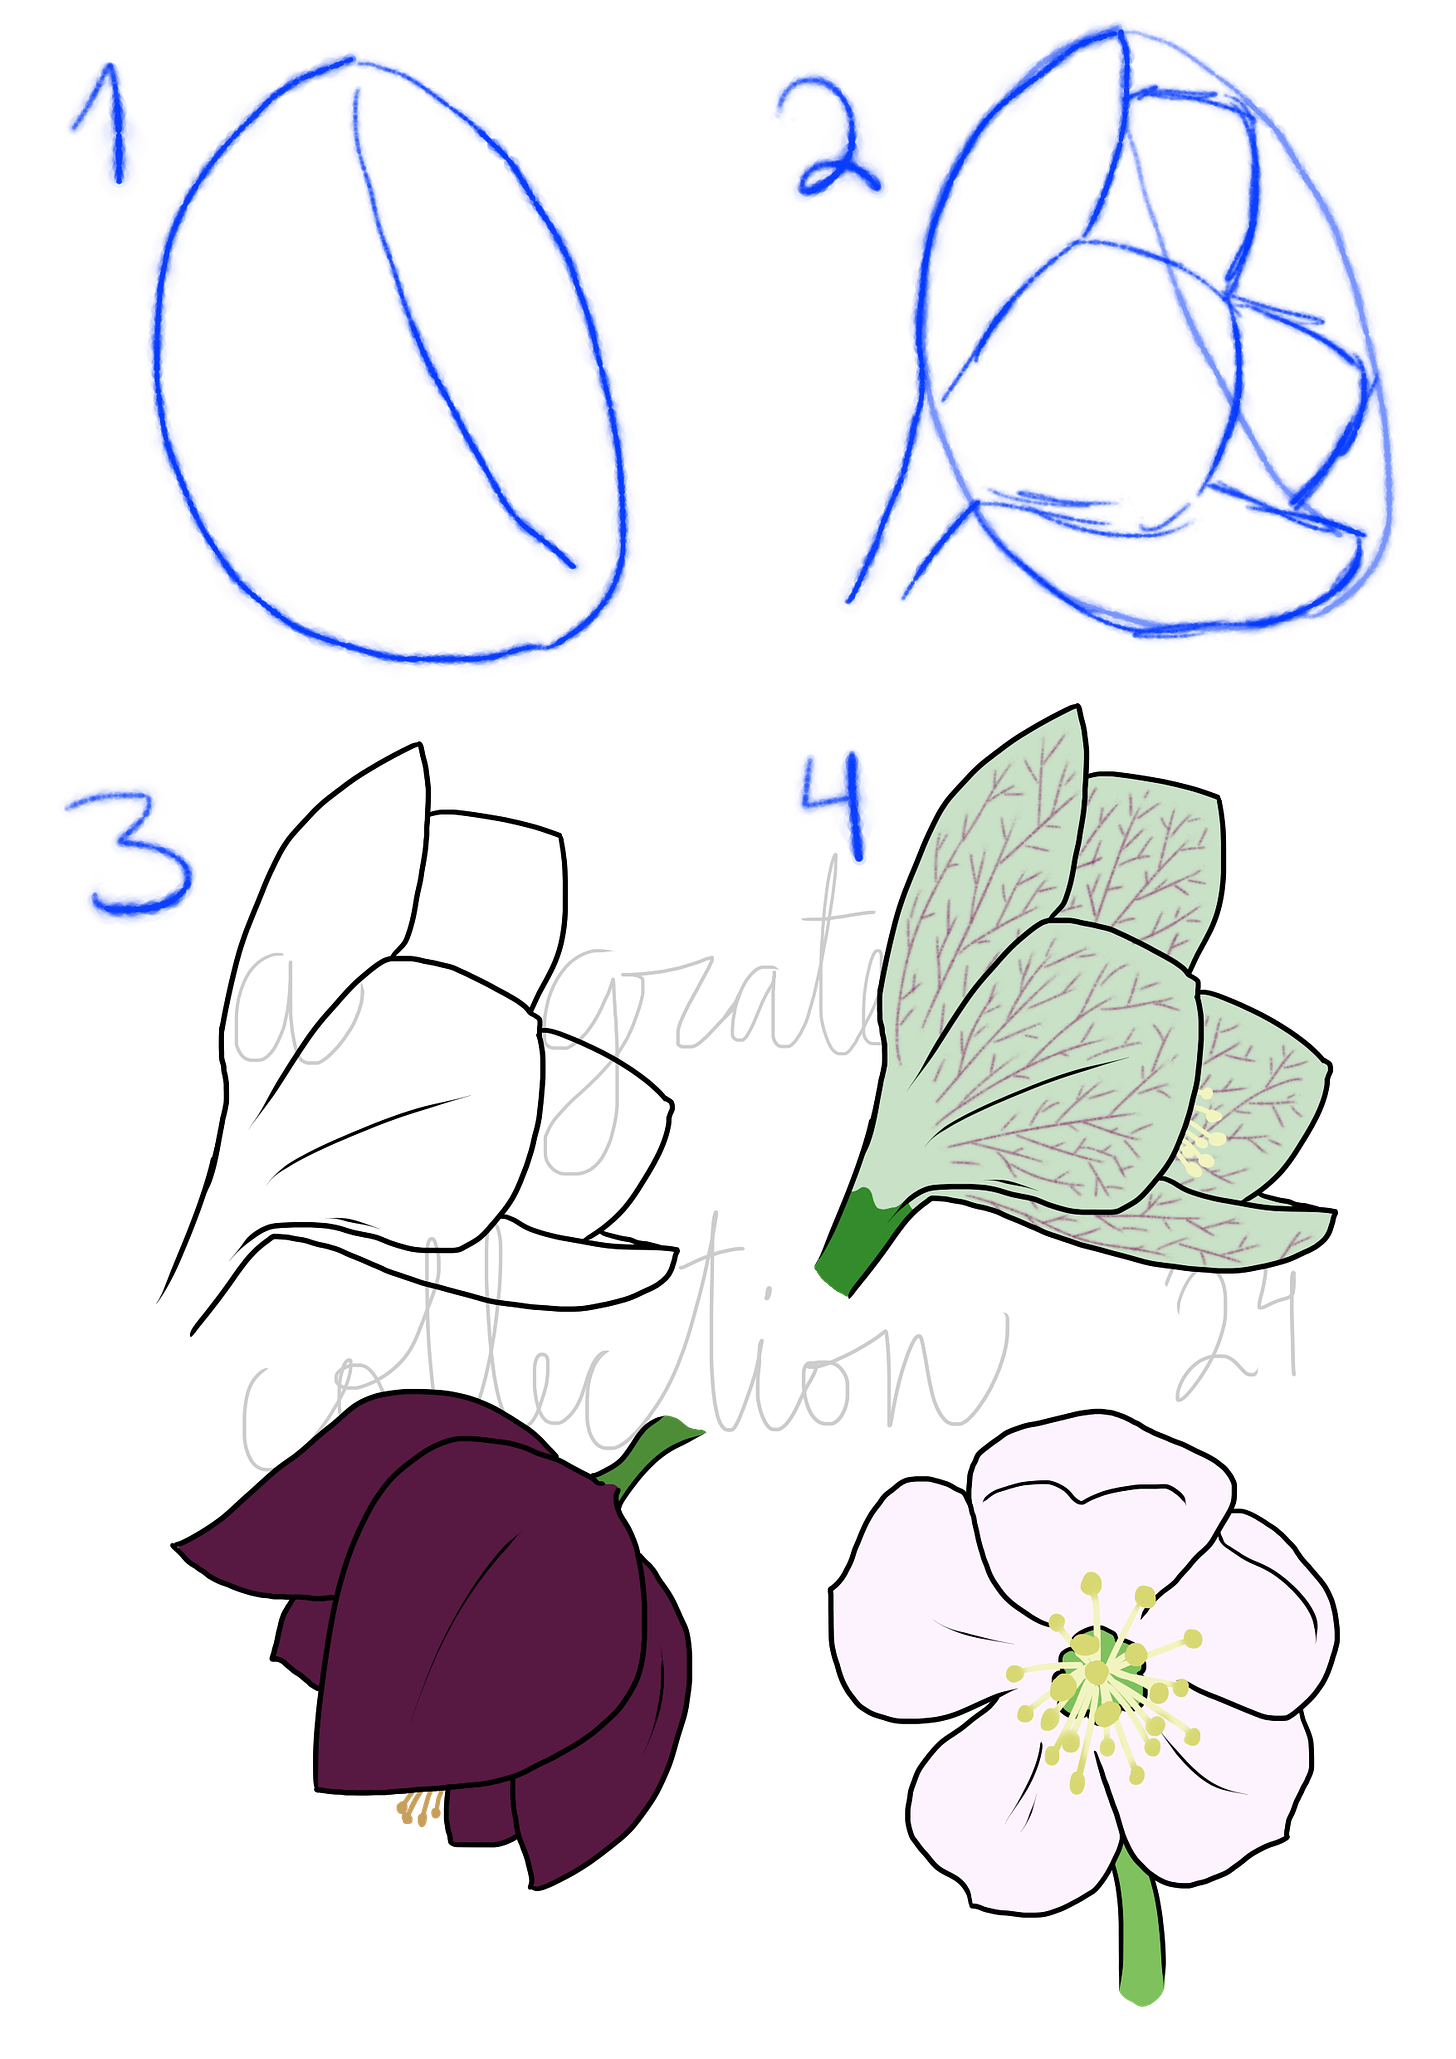 4 steps to draw a hellebore blossom, and then 2 more examples of colors (purple and pink-white) at various angles.